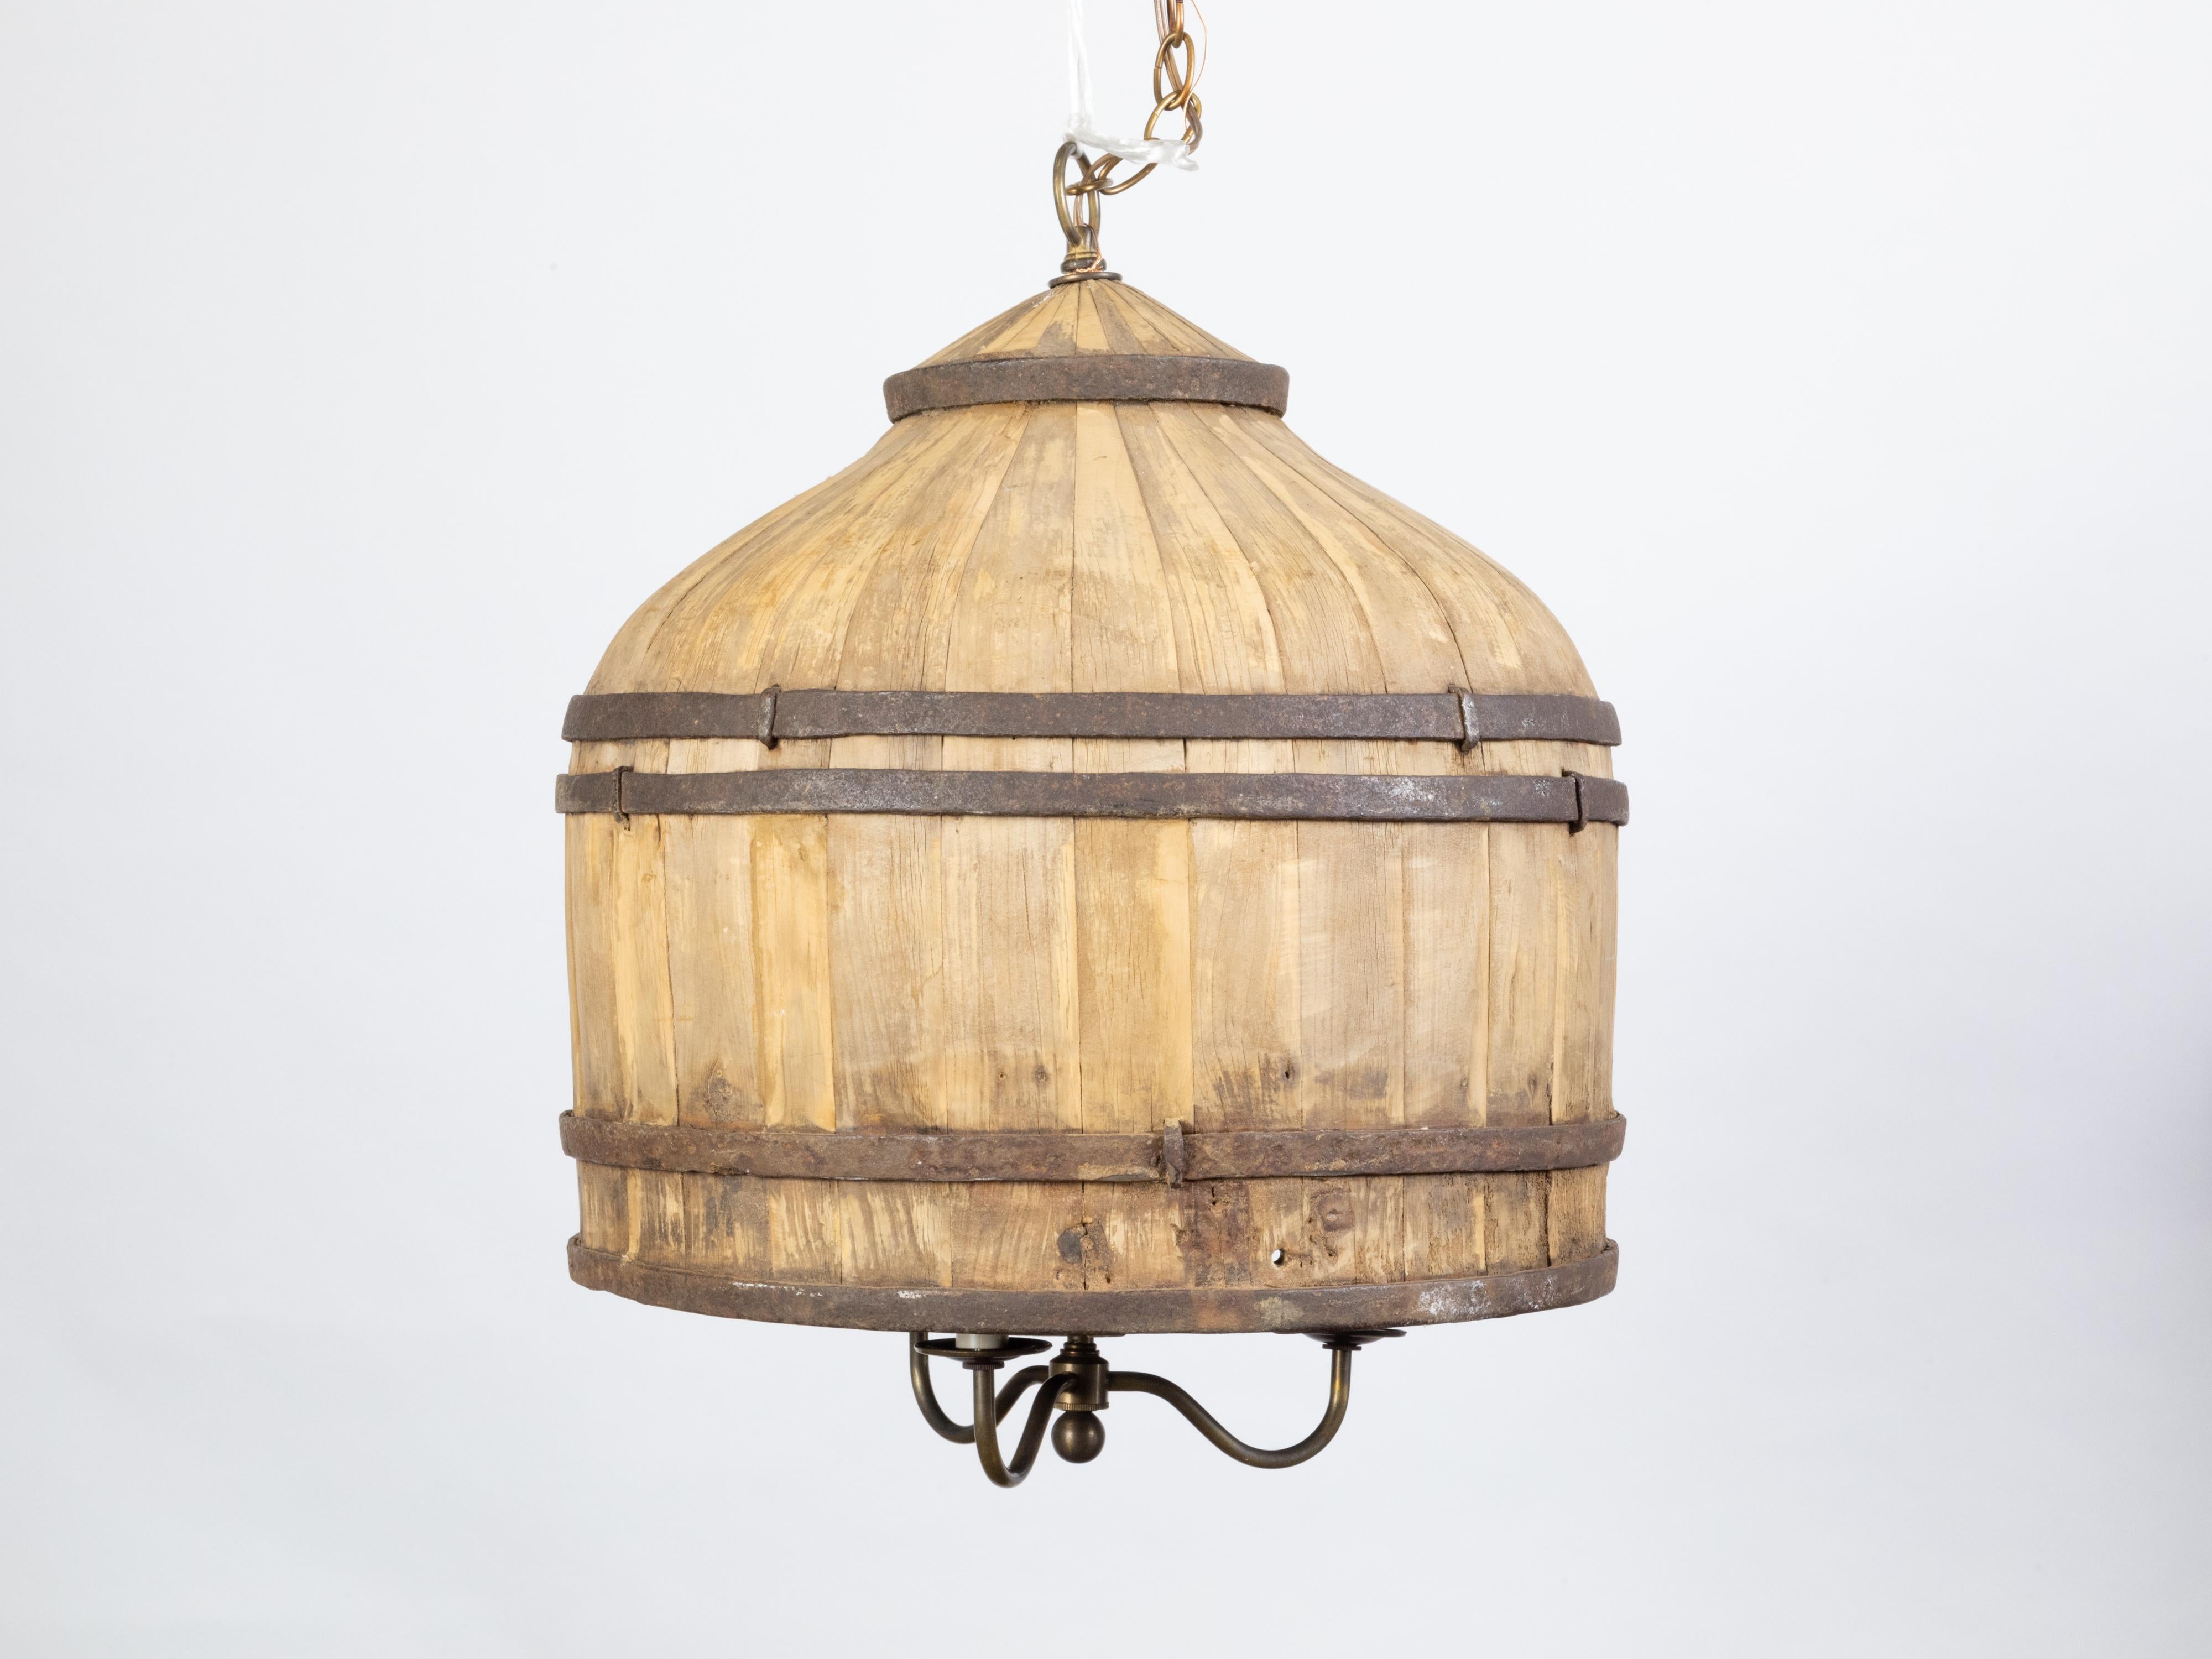 Rustic English Vintage Wooden Barrel Light Fixture with Three Scrolling Arms For Sale 1